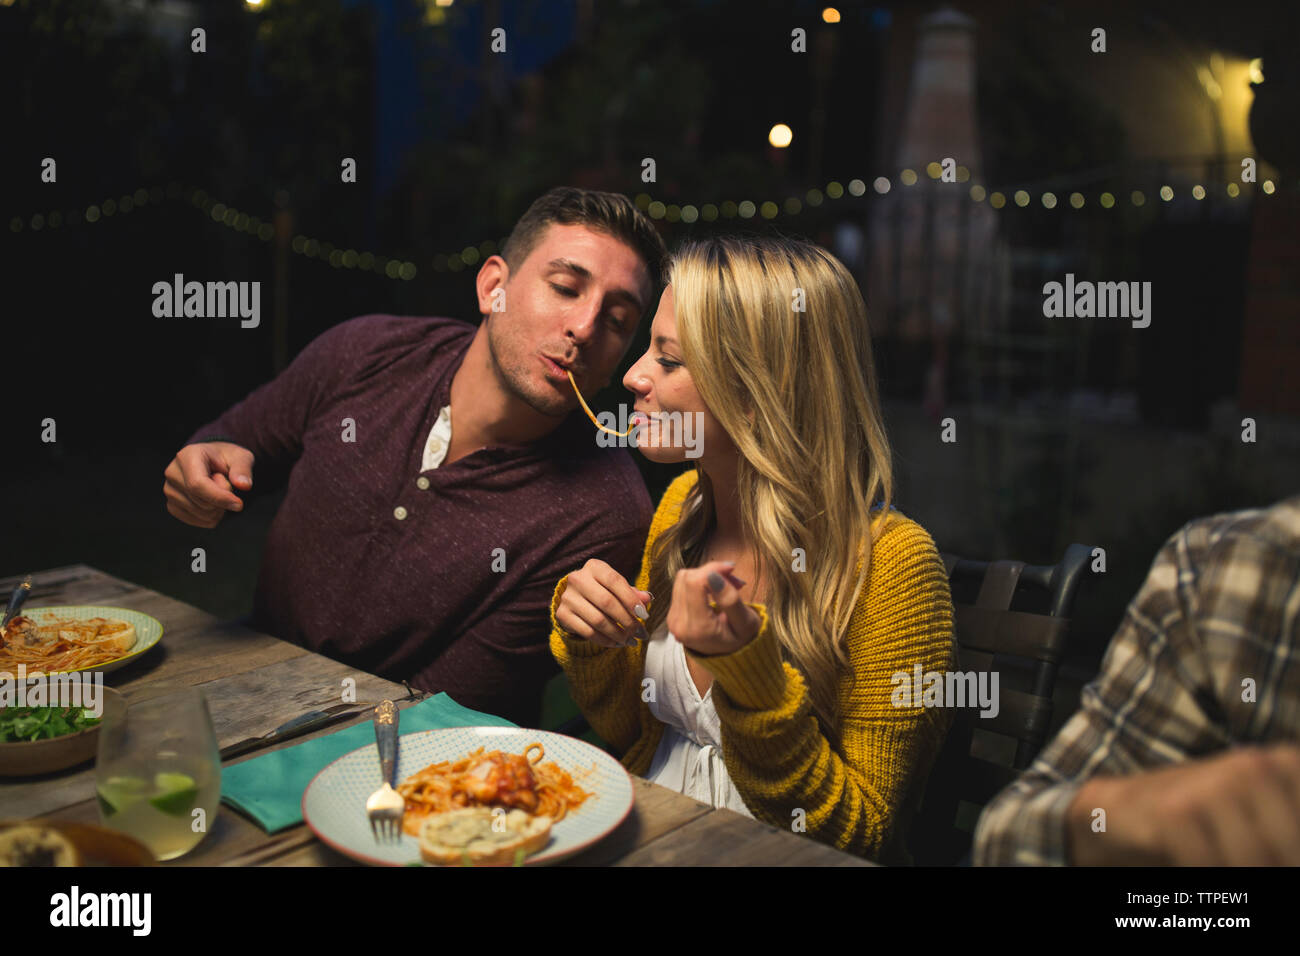 Playful couple eating pasta while enjoying dinner party with friends Stock Photo